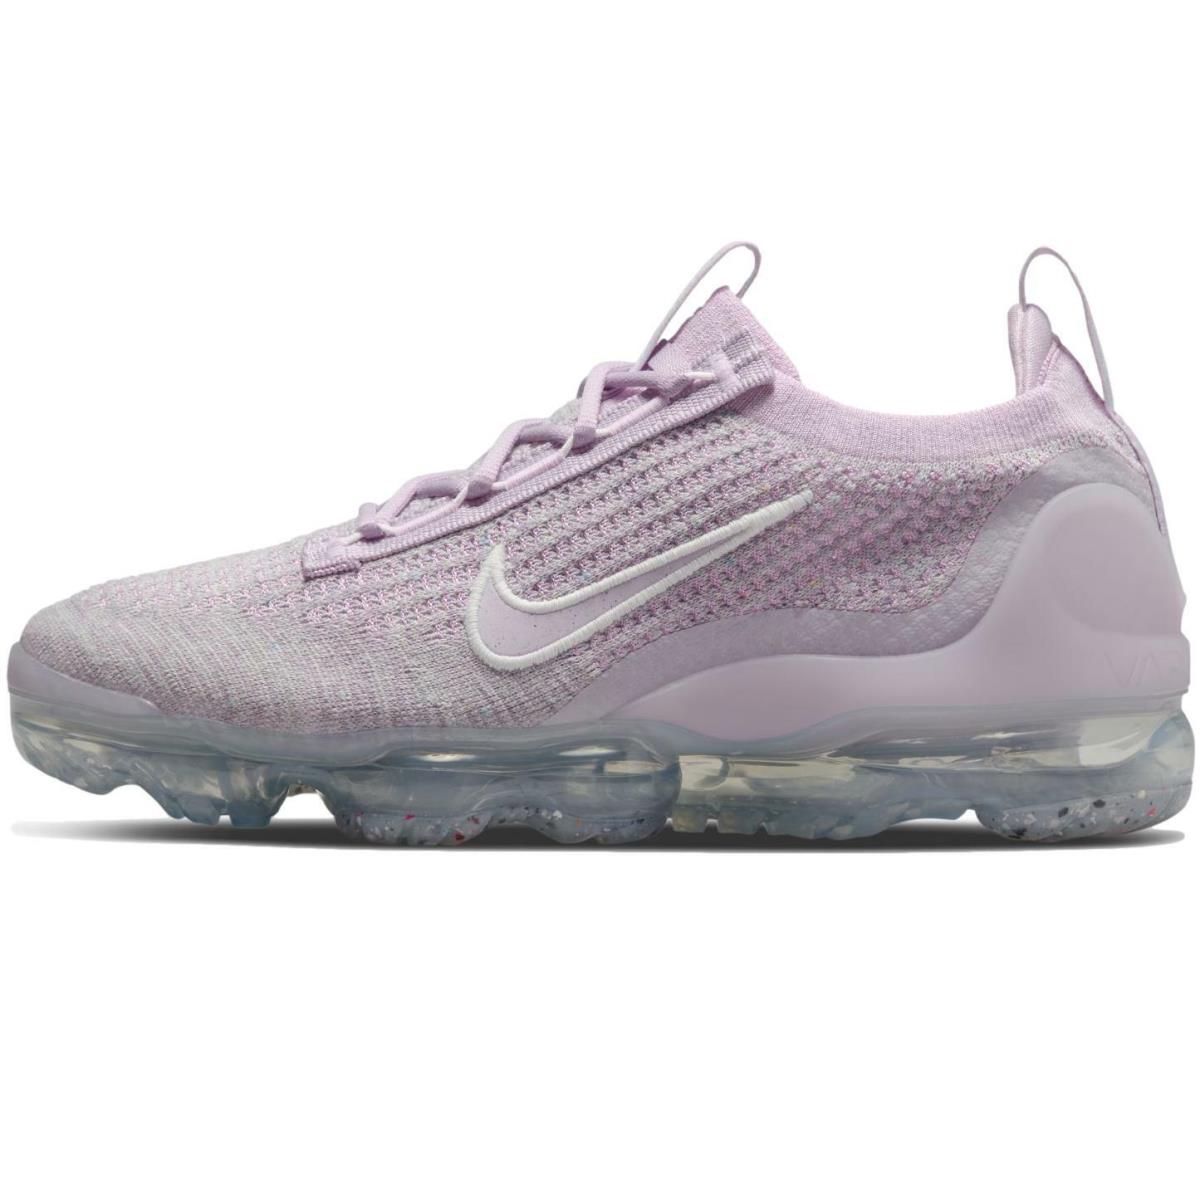 Nike shoes Air Vapormax Flyknit - Light Arctic Pink/Iced Lilac 0